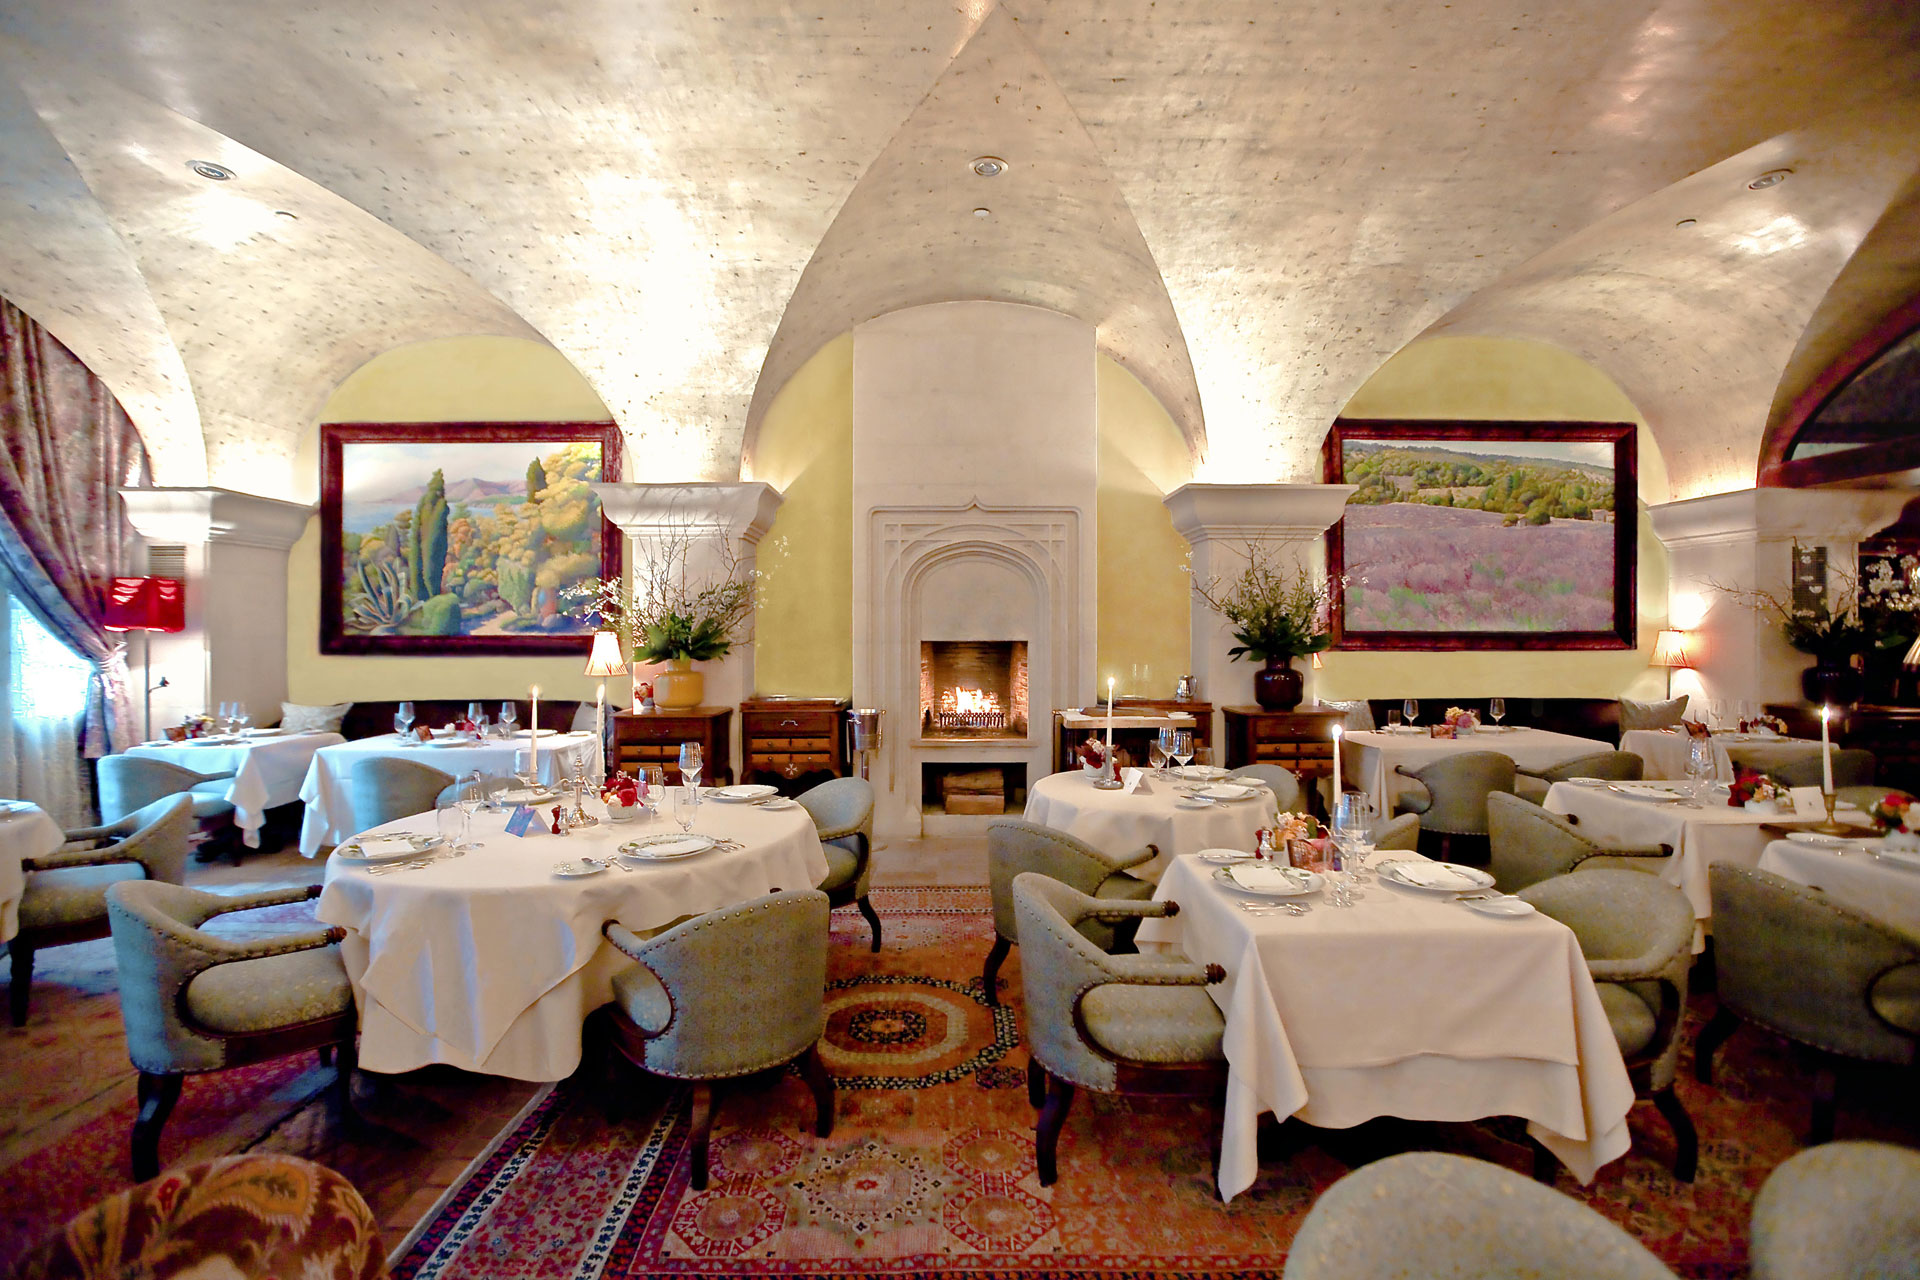 Bouley Main Dining Room (History - Bouley Restaurant at 163 Duane in the Mohawk Building)